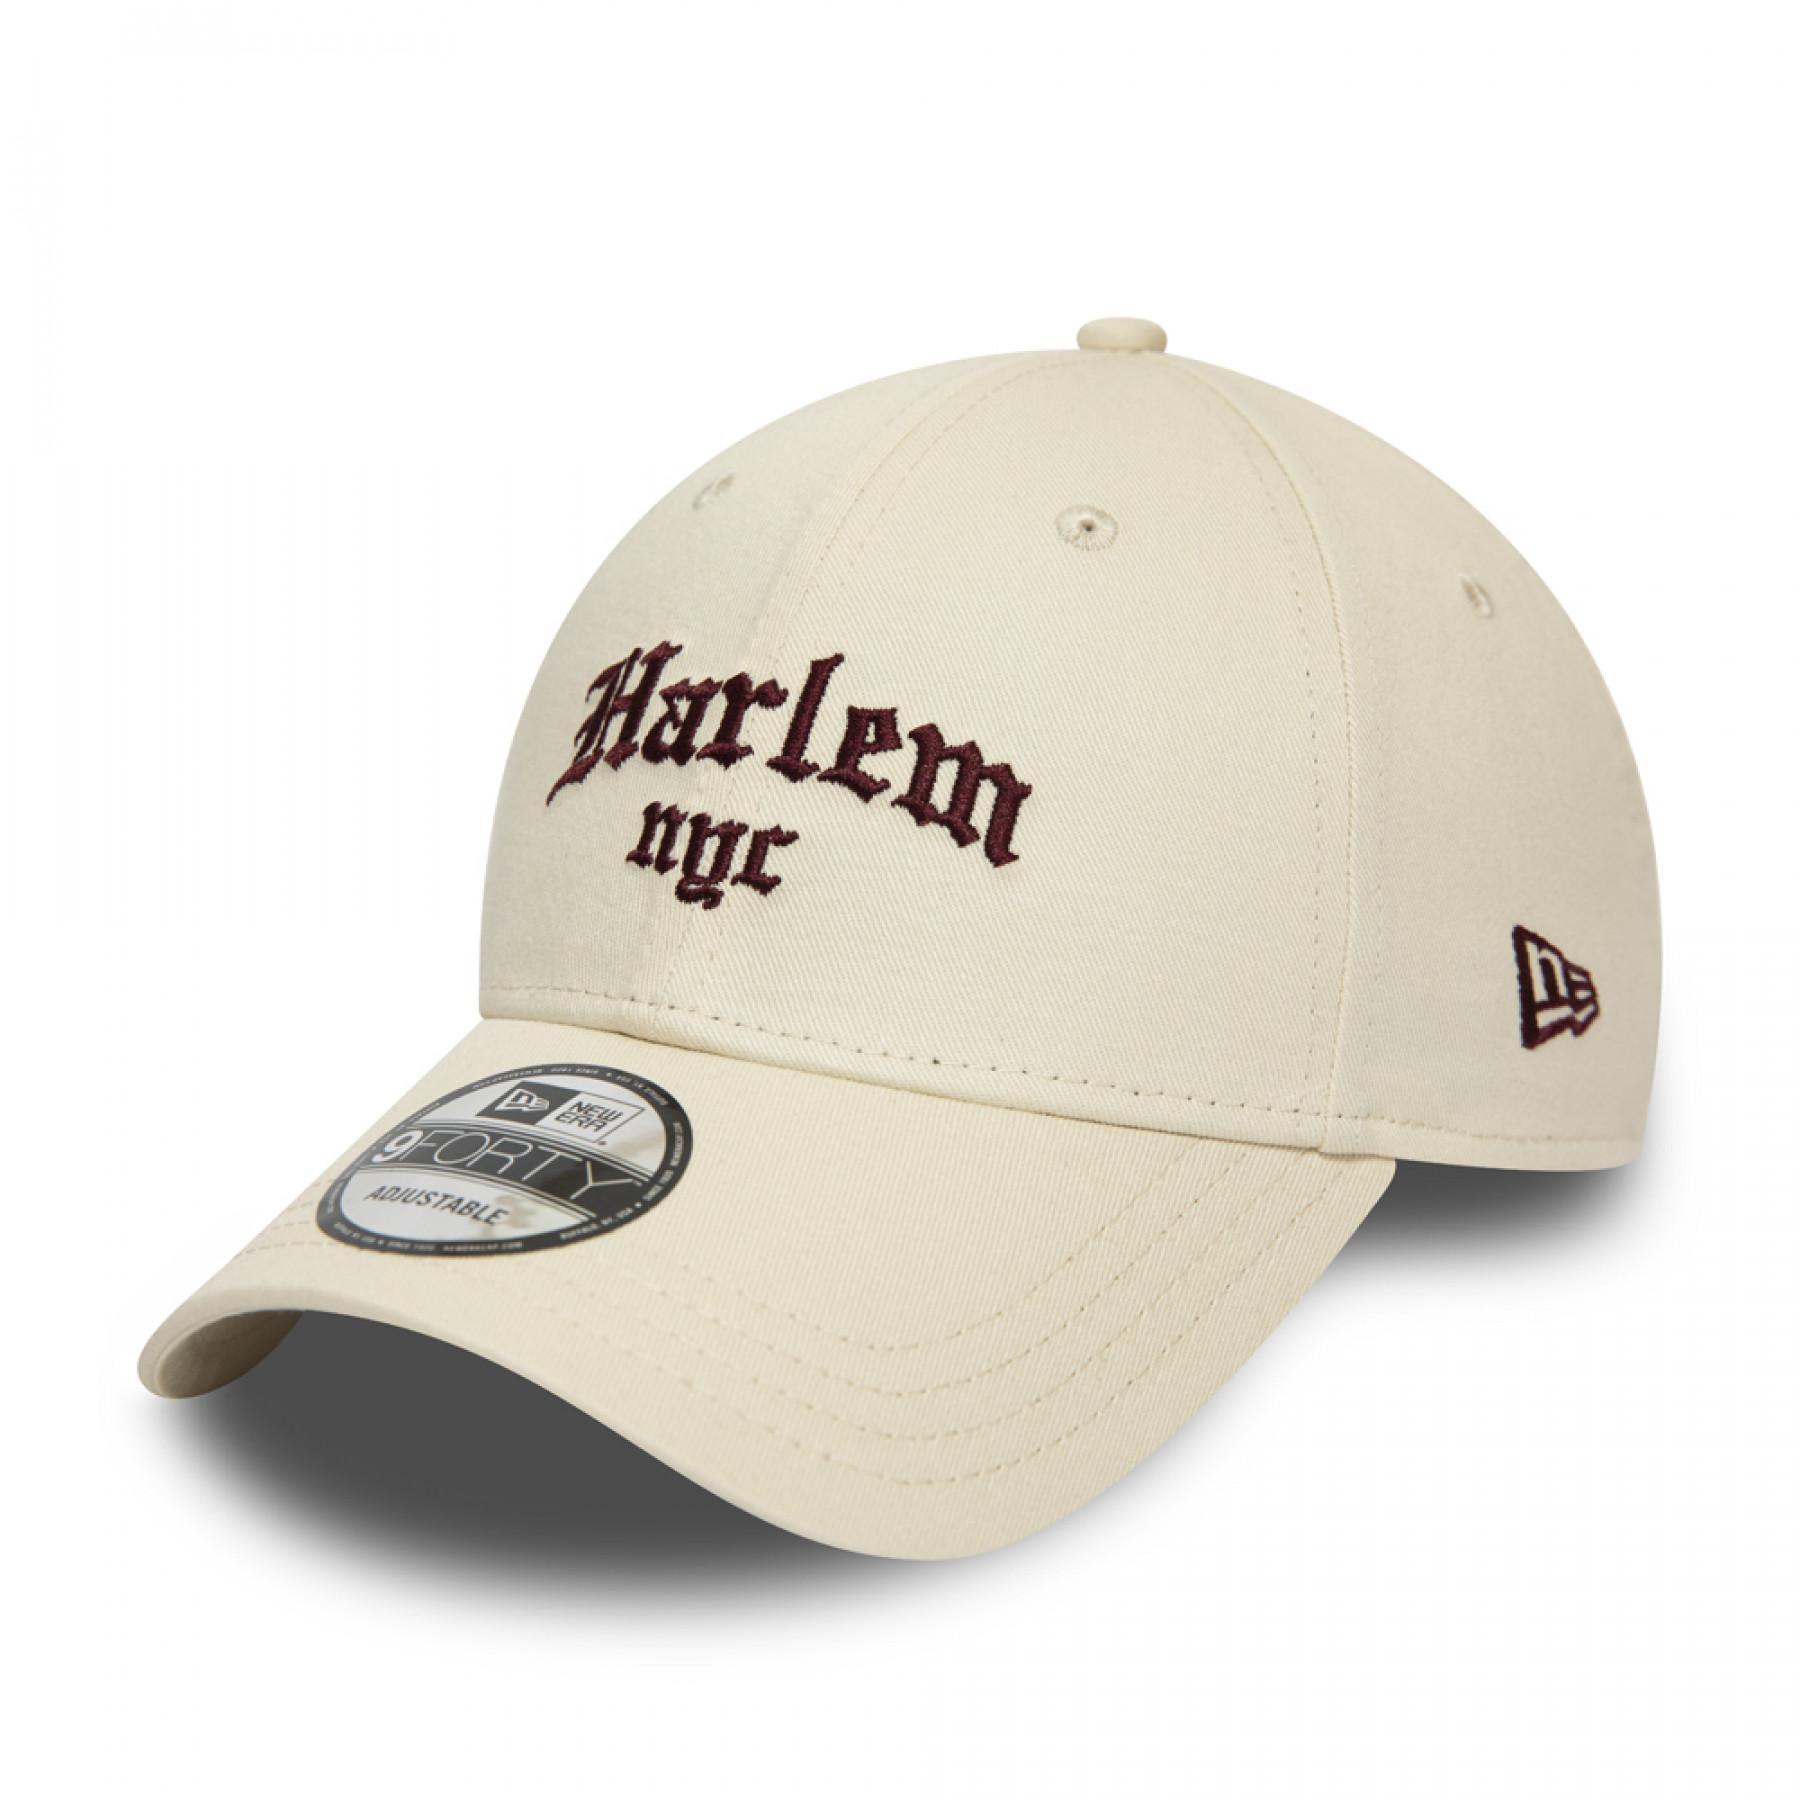 Casquette New Era 9Forty NYC Harlem